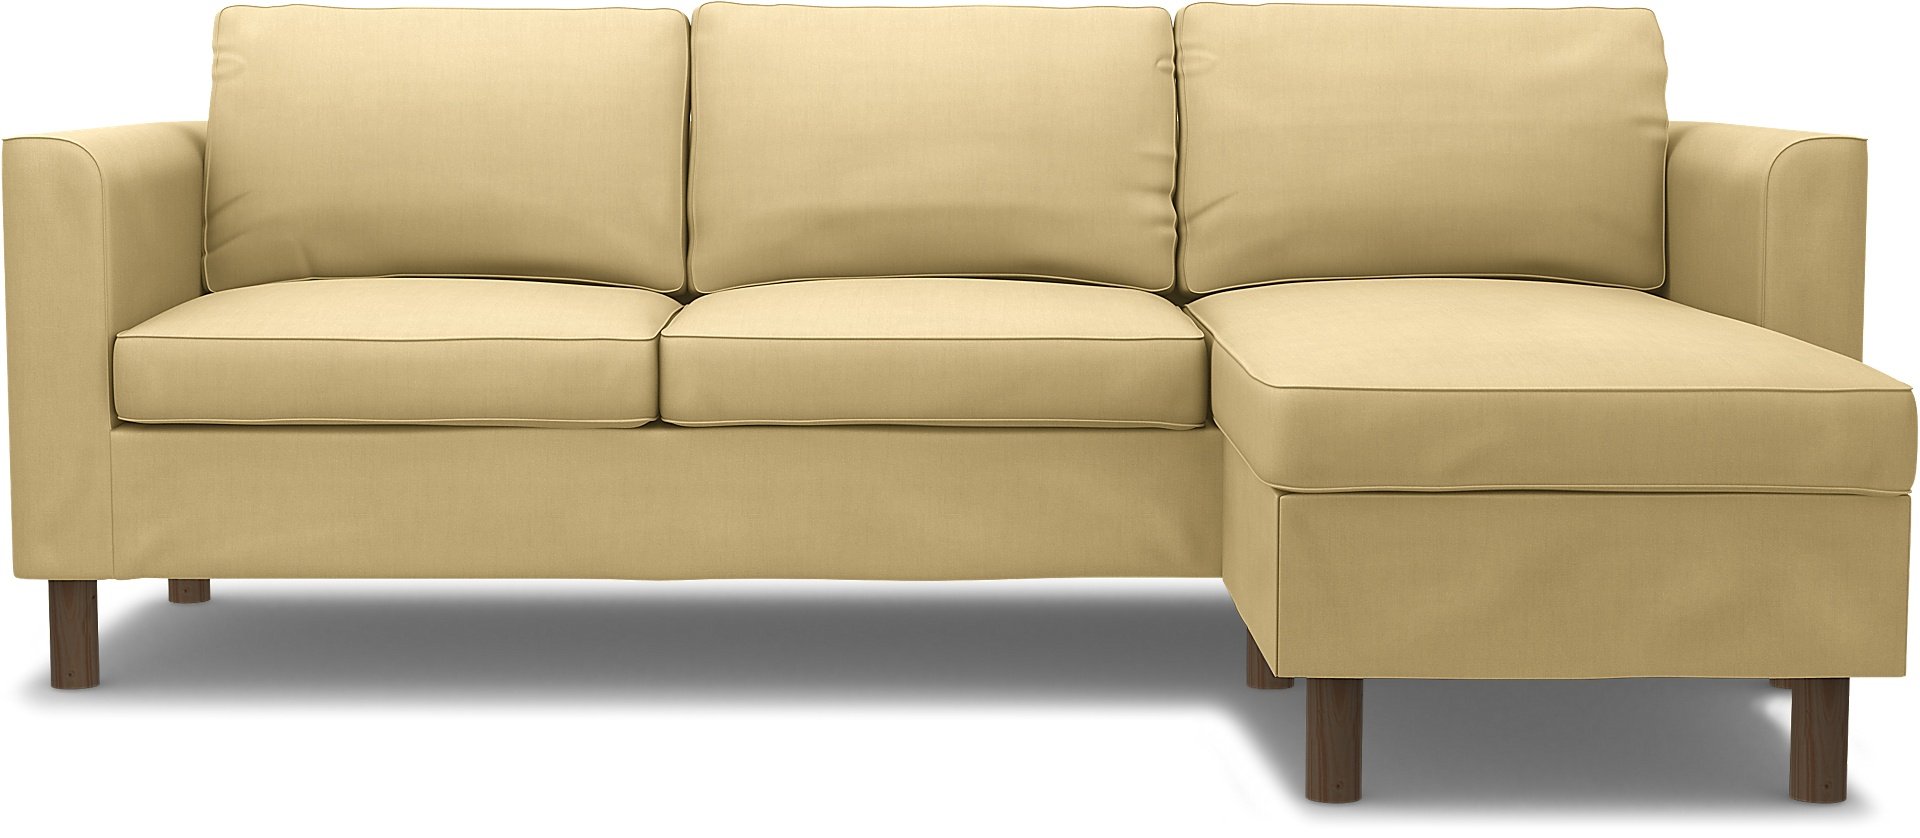 IKEA - Parup 3 Seater with chaise longue, Straw Yellow, Linen - Bemz